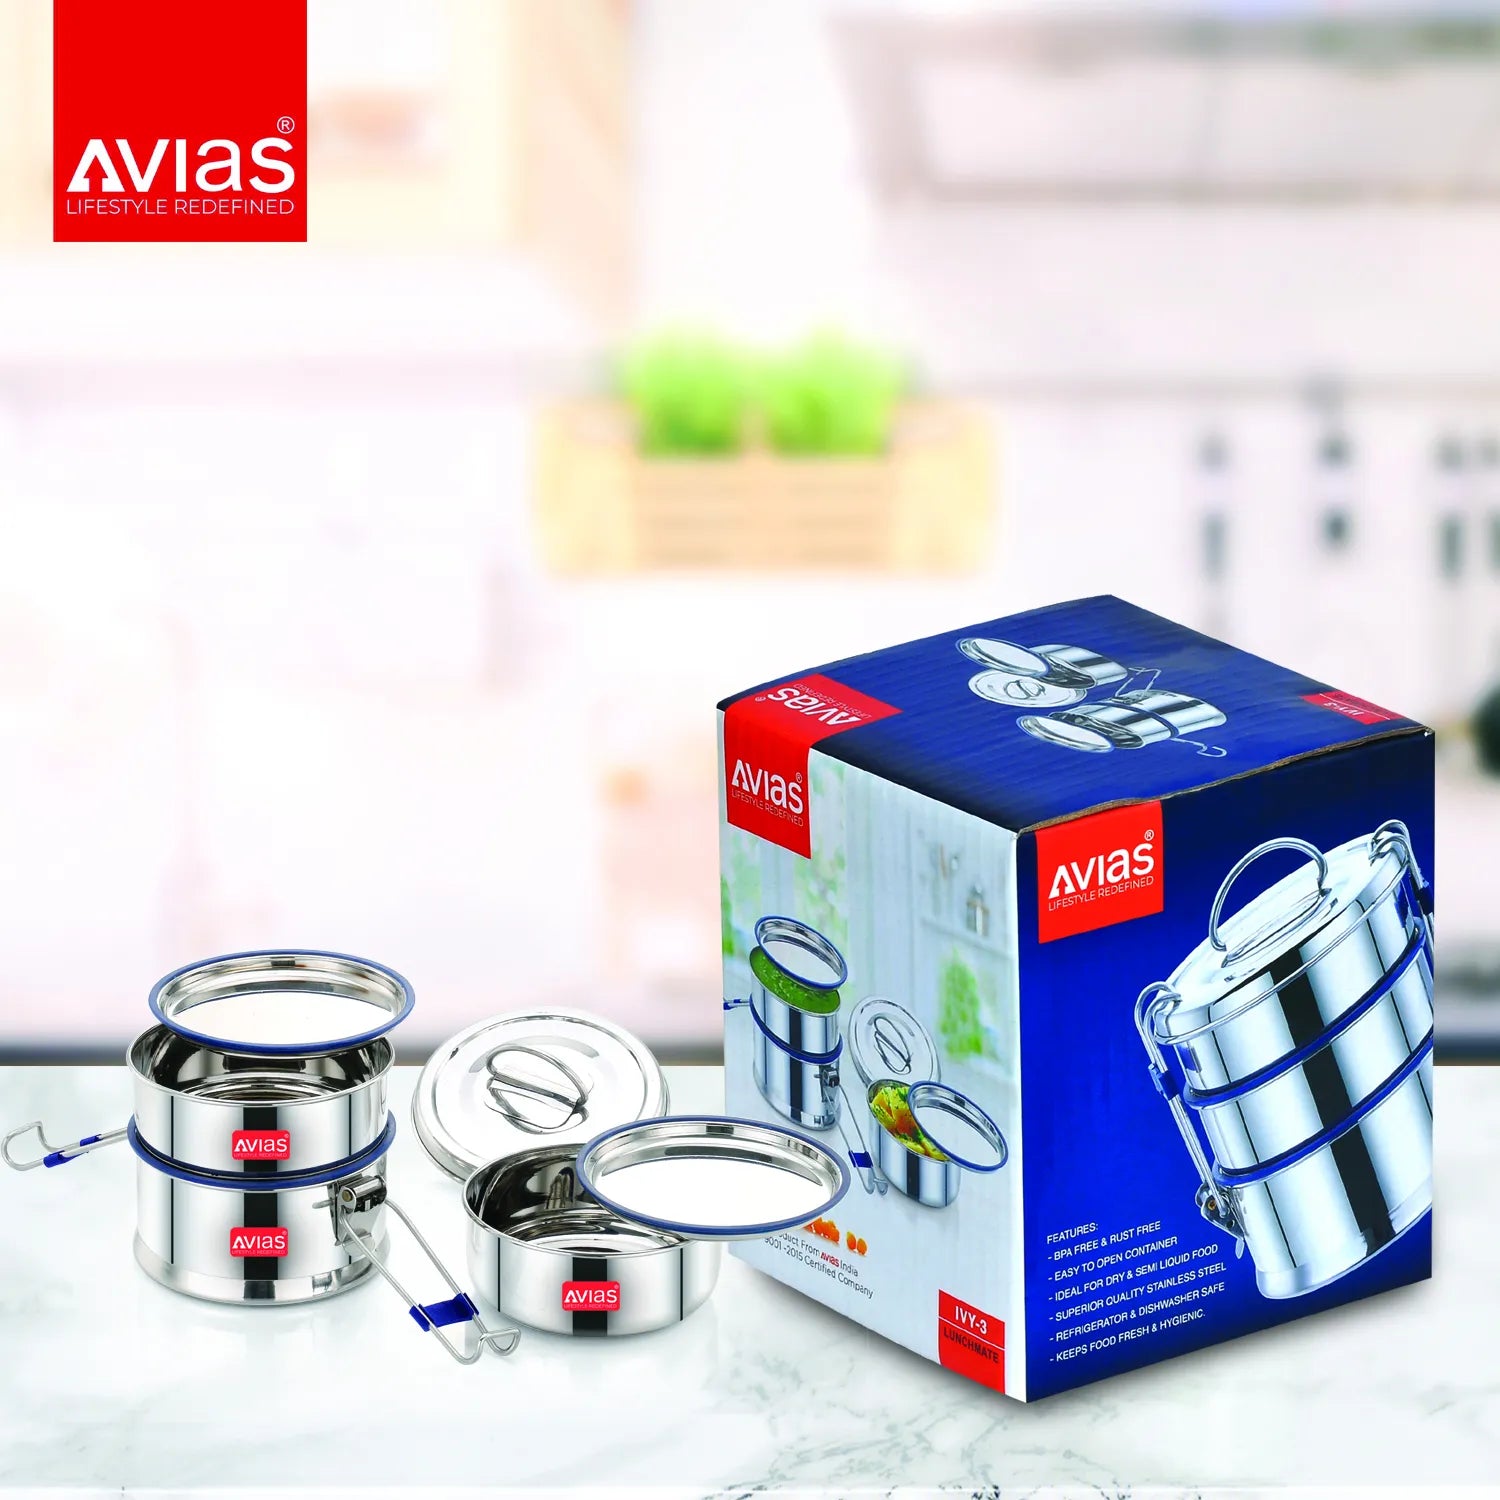 AVIAS Ivy Stainless Steel Lunch box package